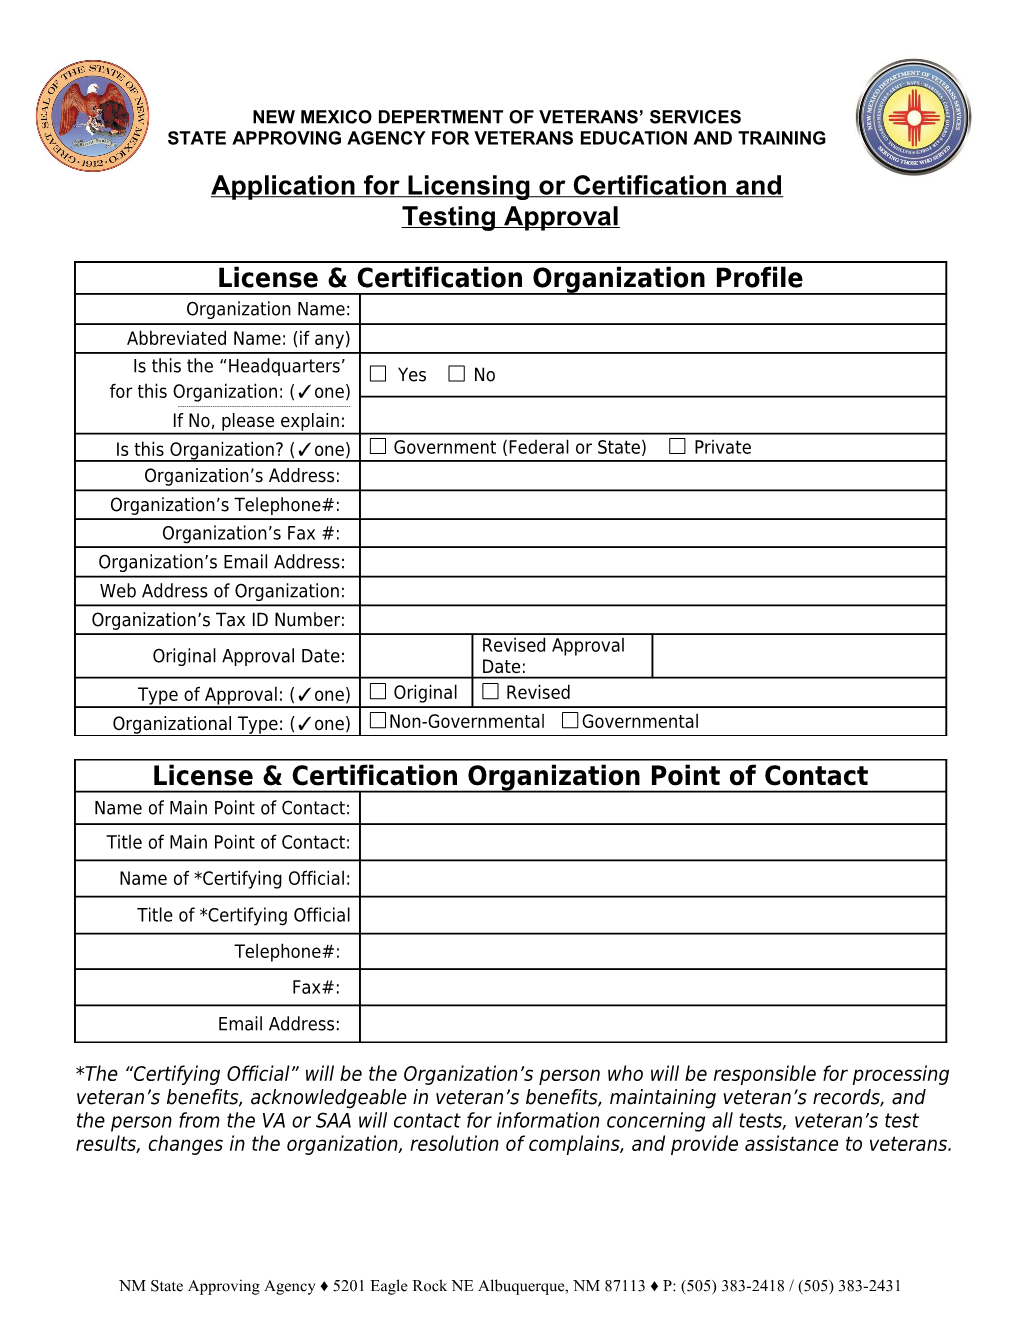 Request for a Facility Code for a Licensing & Certification Organization